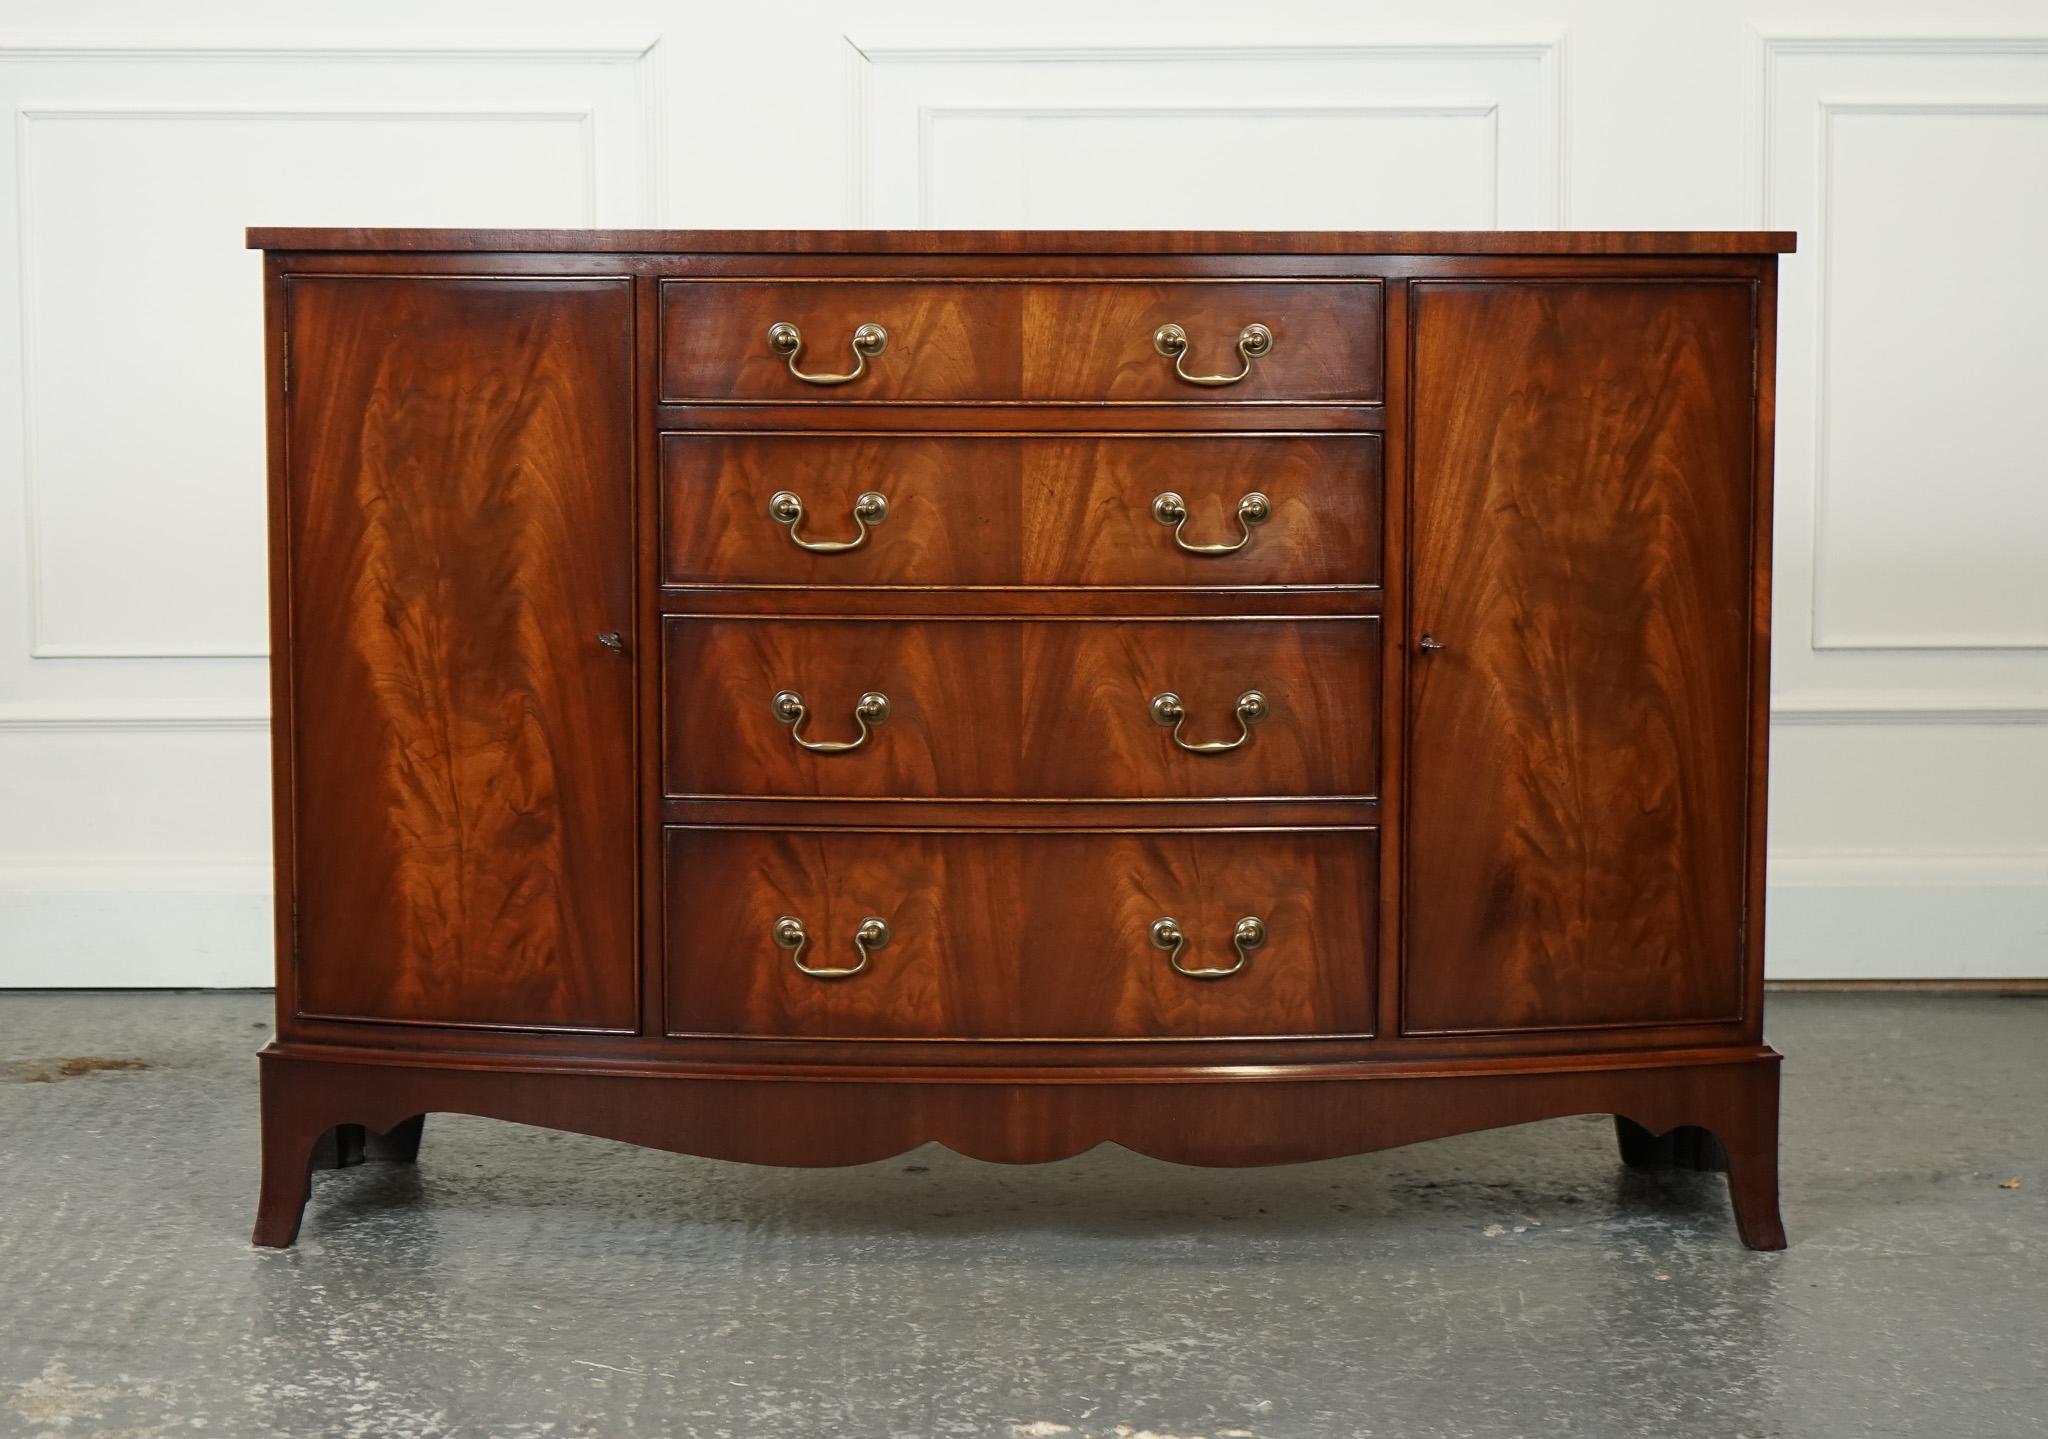 British STUNNING REPRODUX BEVAN FUNNELL SIDEBOARD WiTH DRAWERS J1